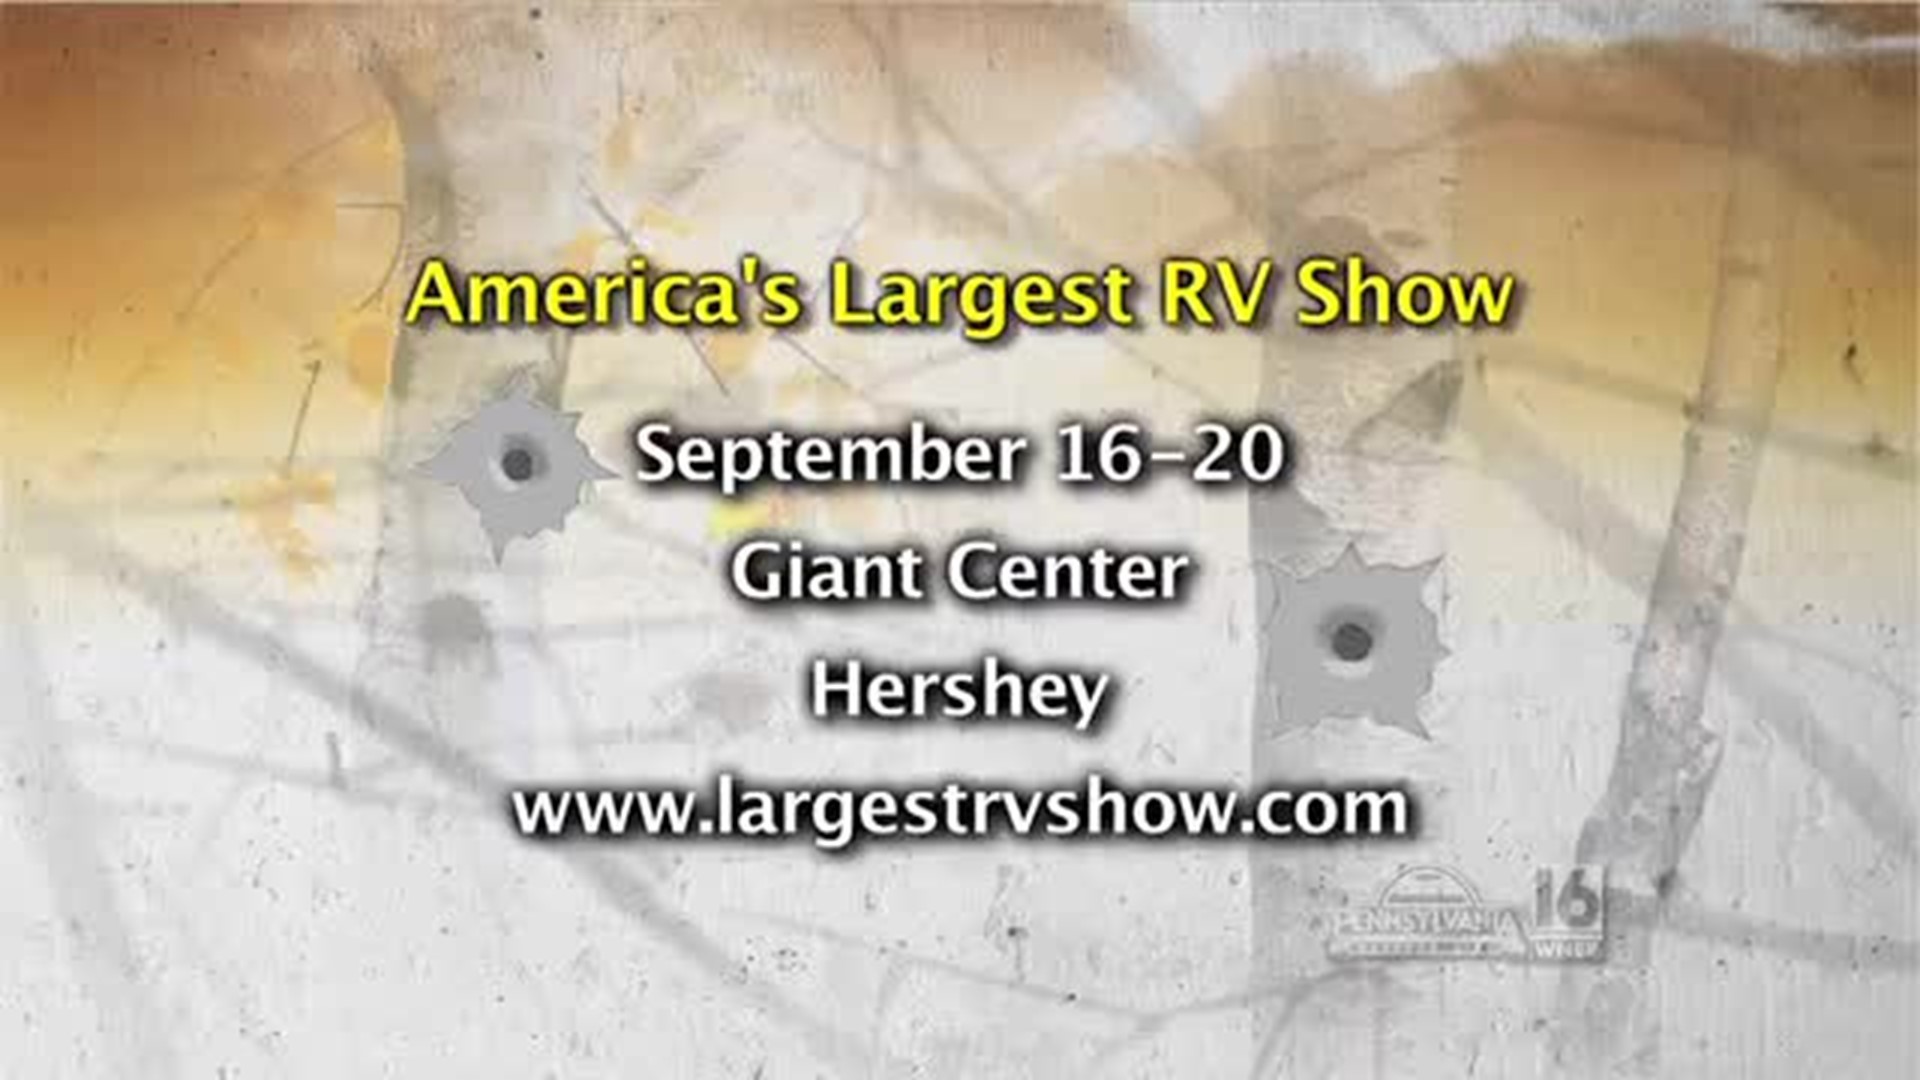 America's Largest RV Show Product Giveaway